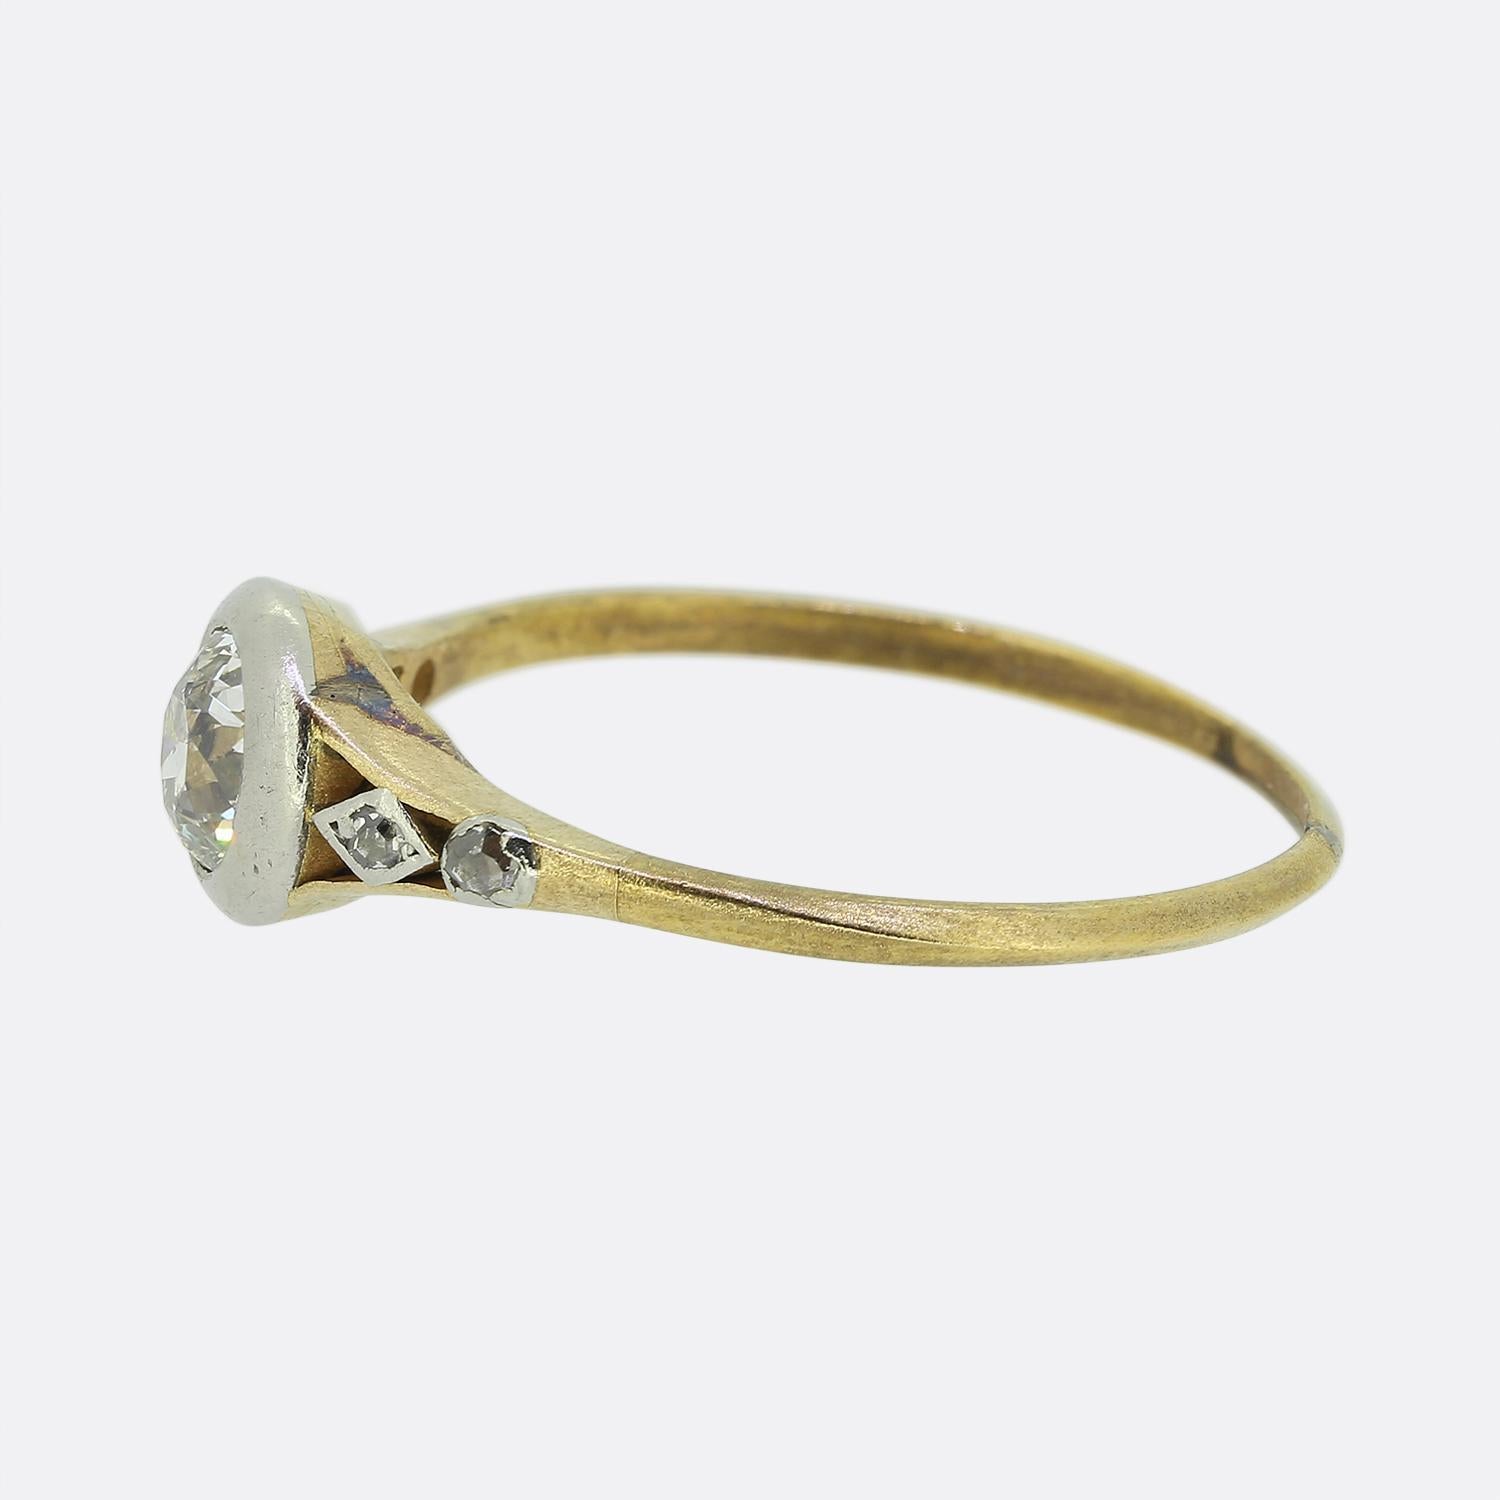 Here we have a beautifully crafted diamond solitaire ring which dates back to the Victorian period. A single round faceted old European cut diamond has been bezel set in platinum at the centre of the face amidst a pair of open split shoulders where